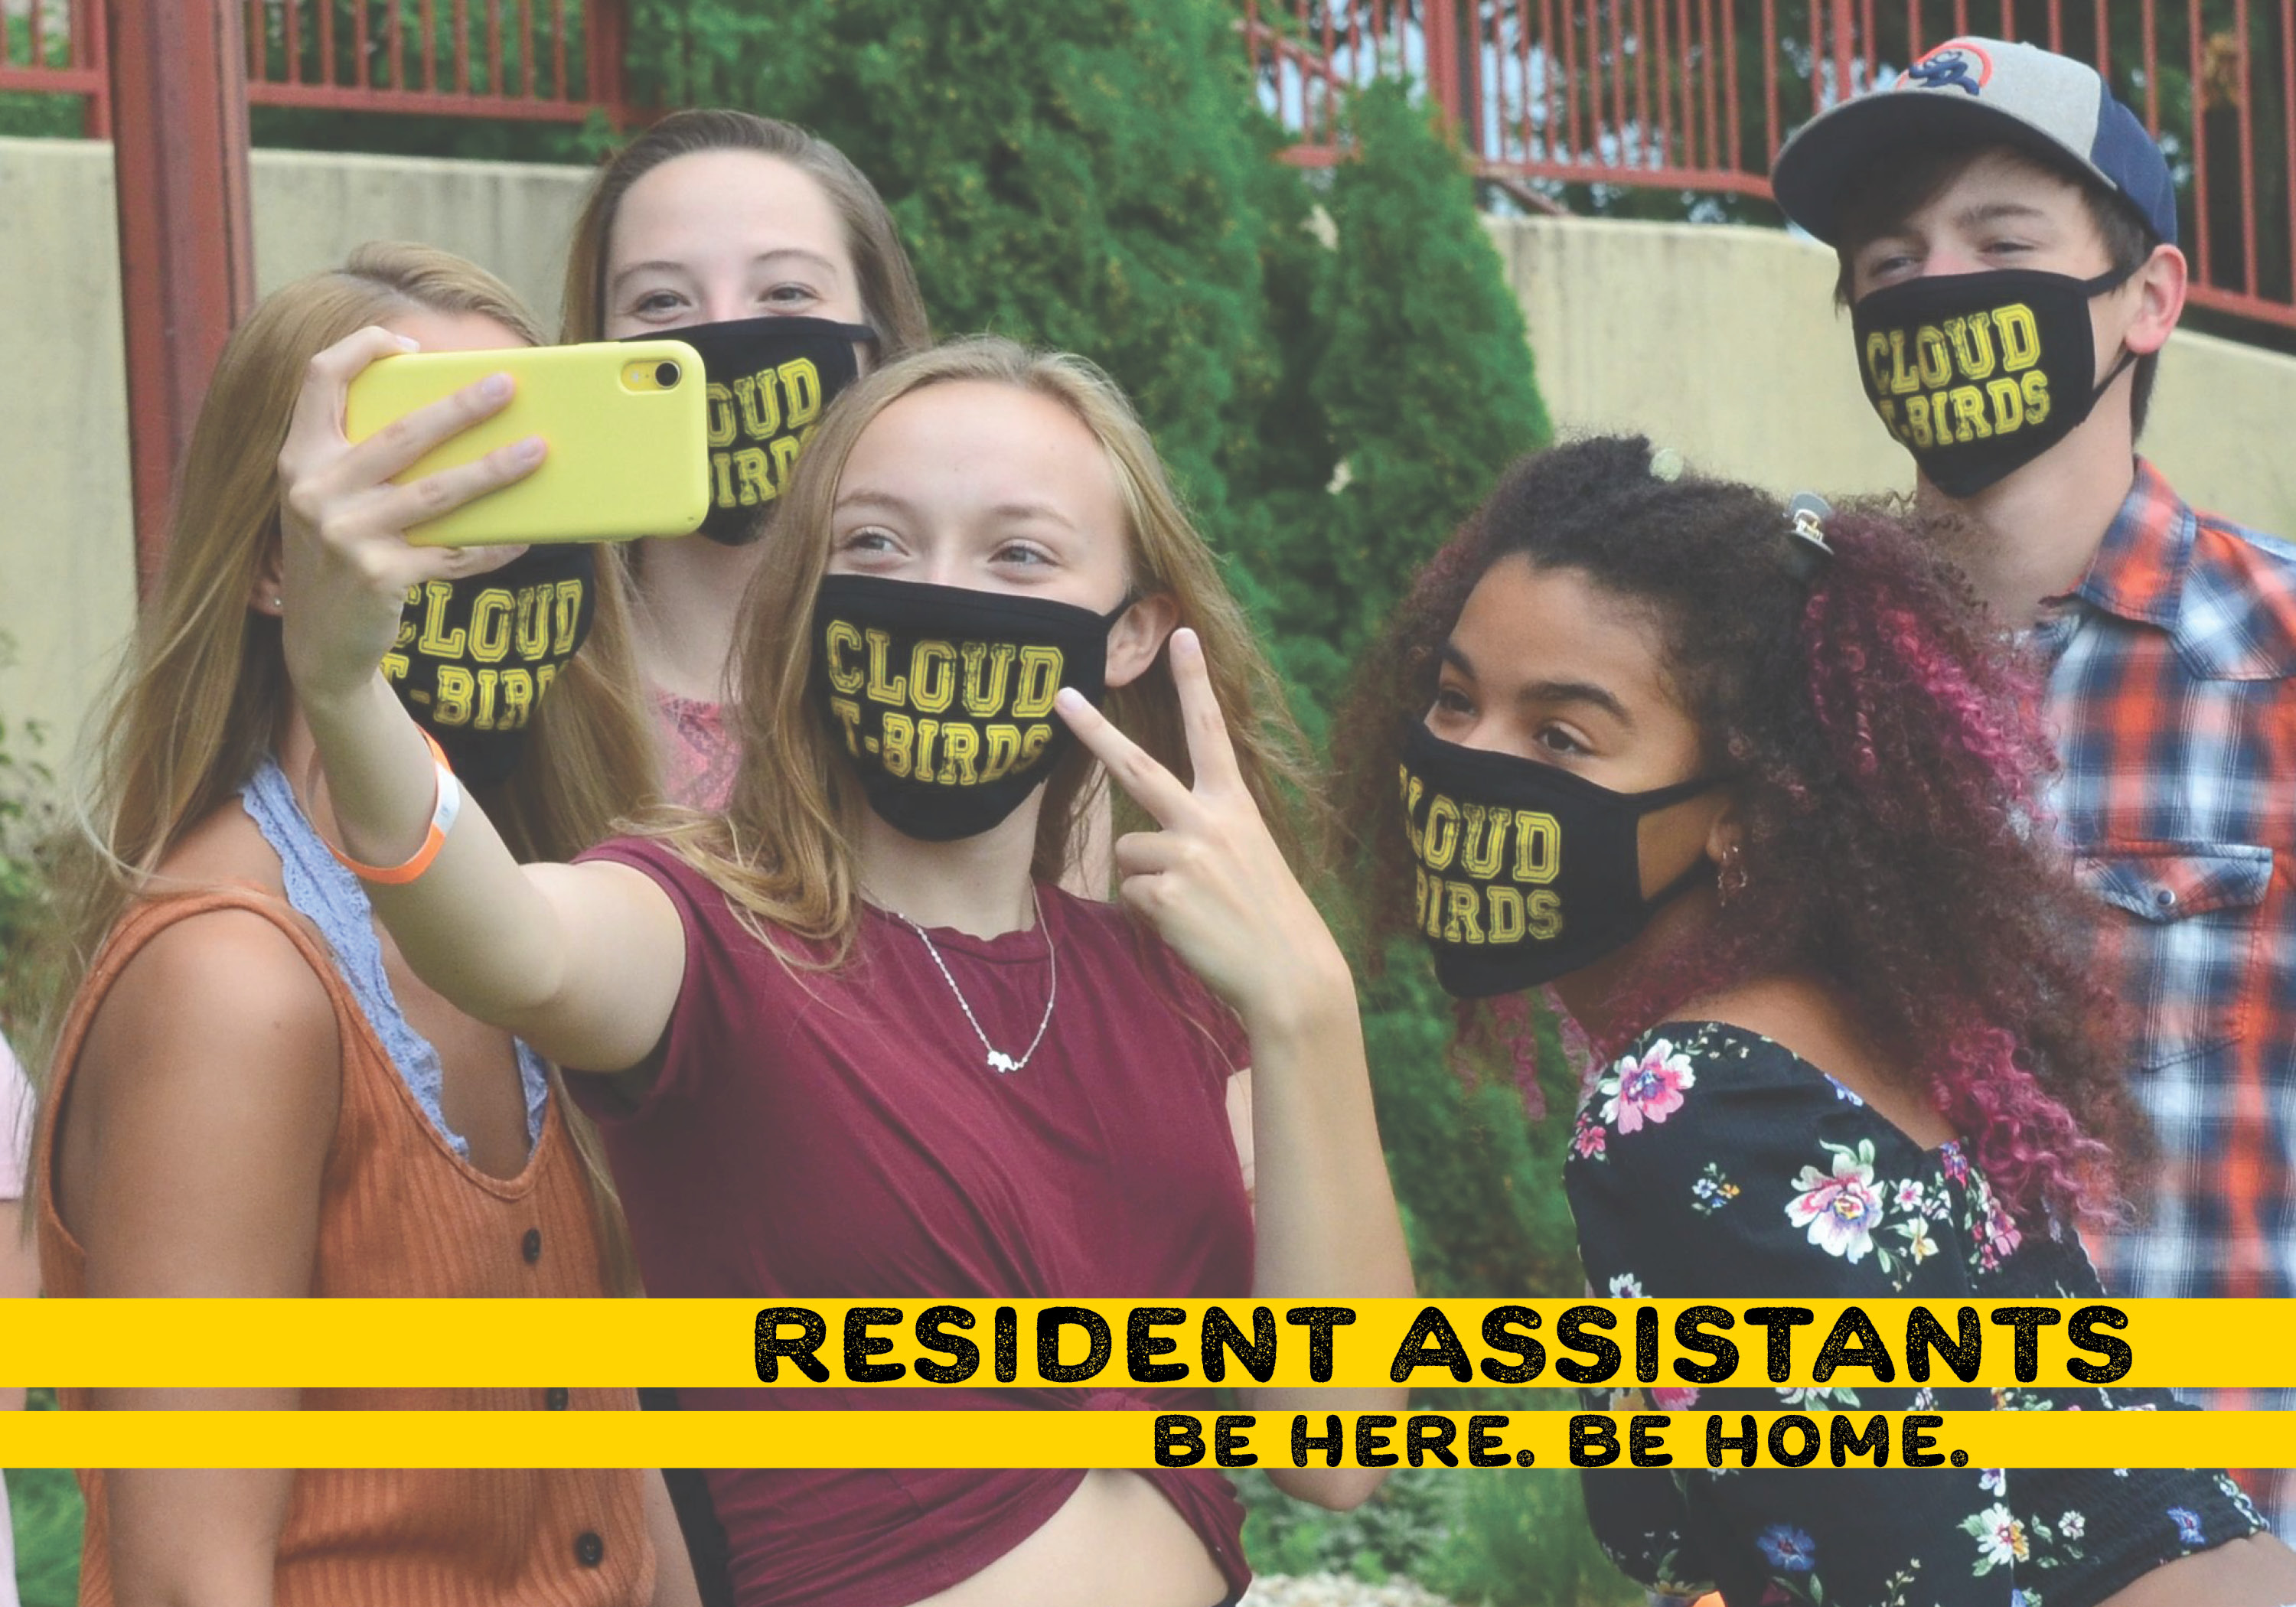 A photo of Resident Assistants.